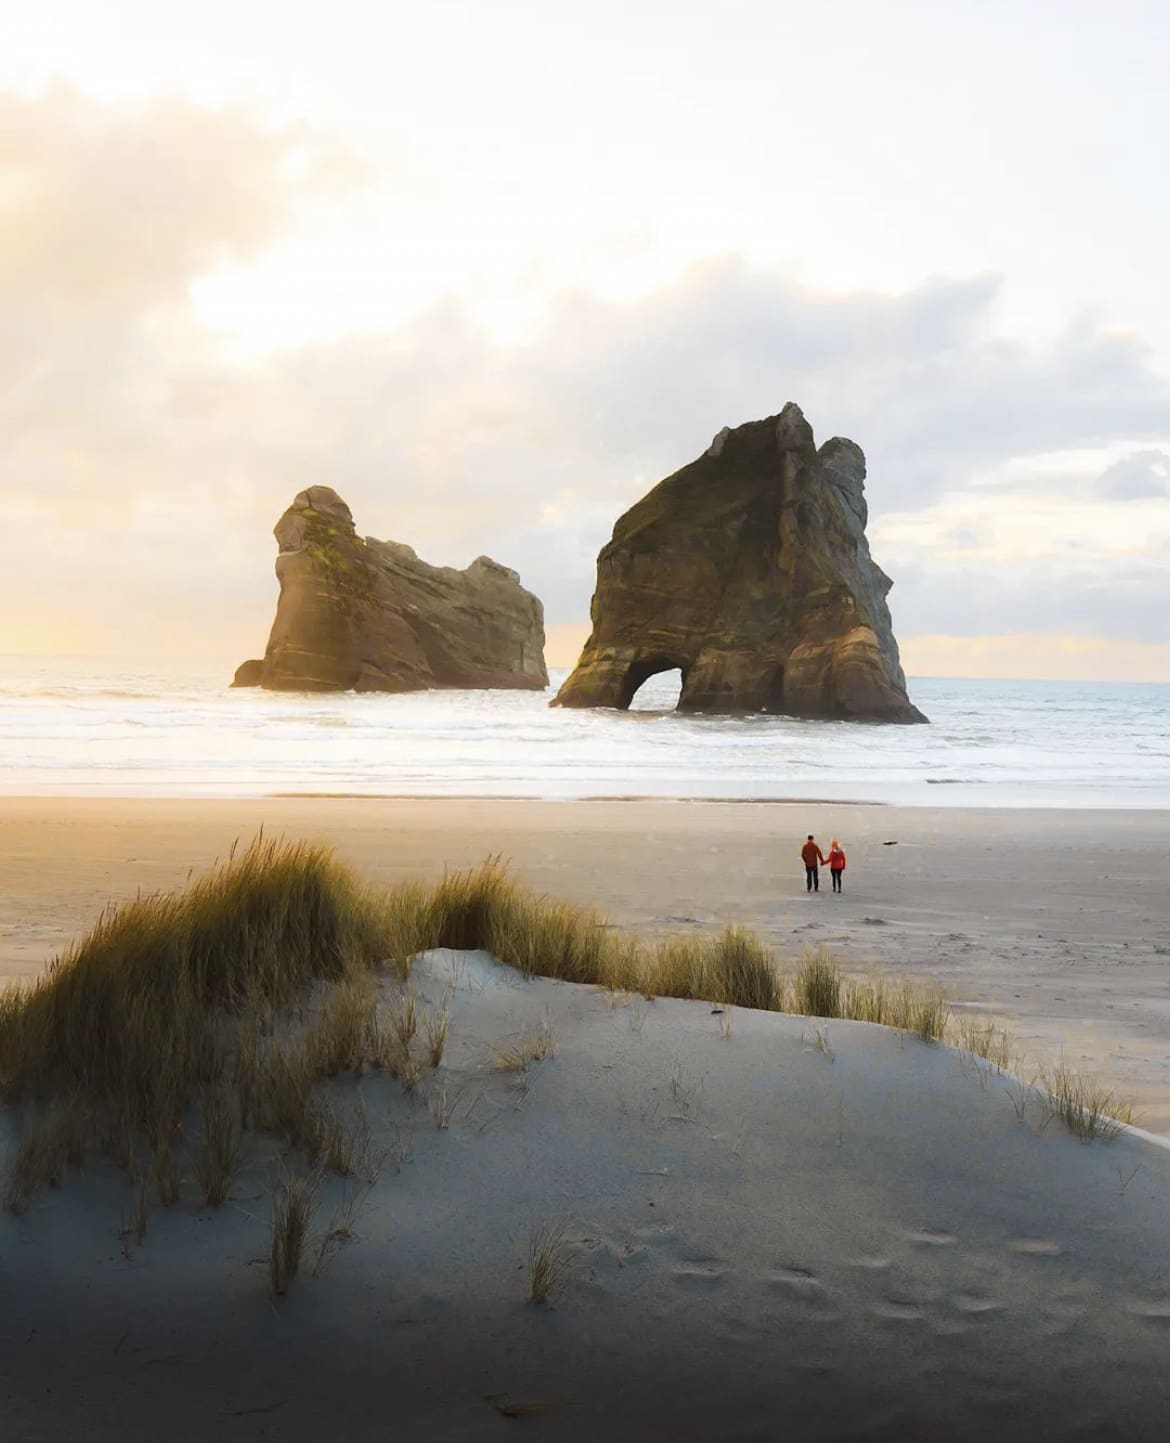 New Zealand is home to some of the most beautiful beaches in the world